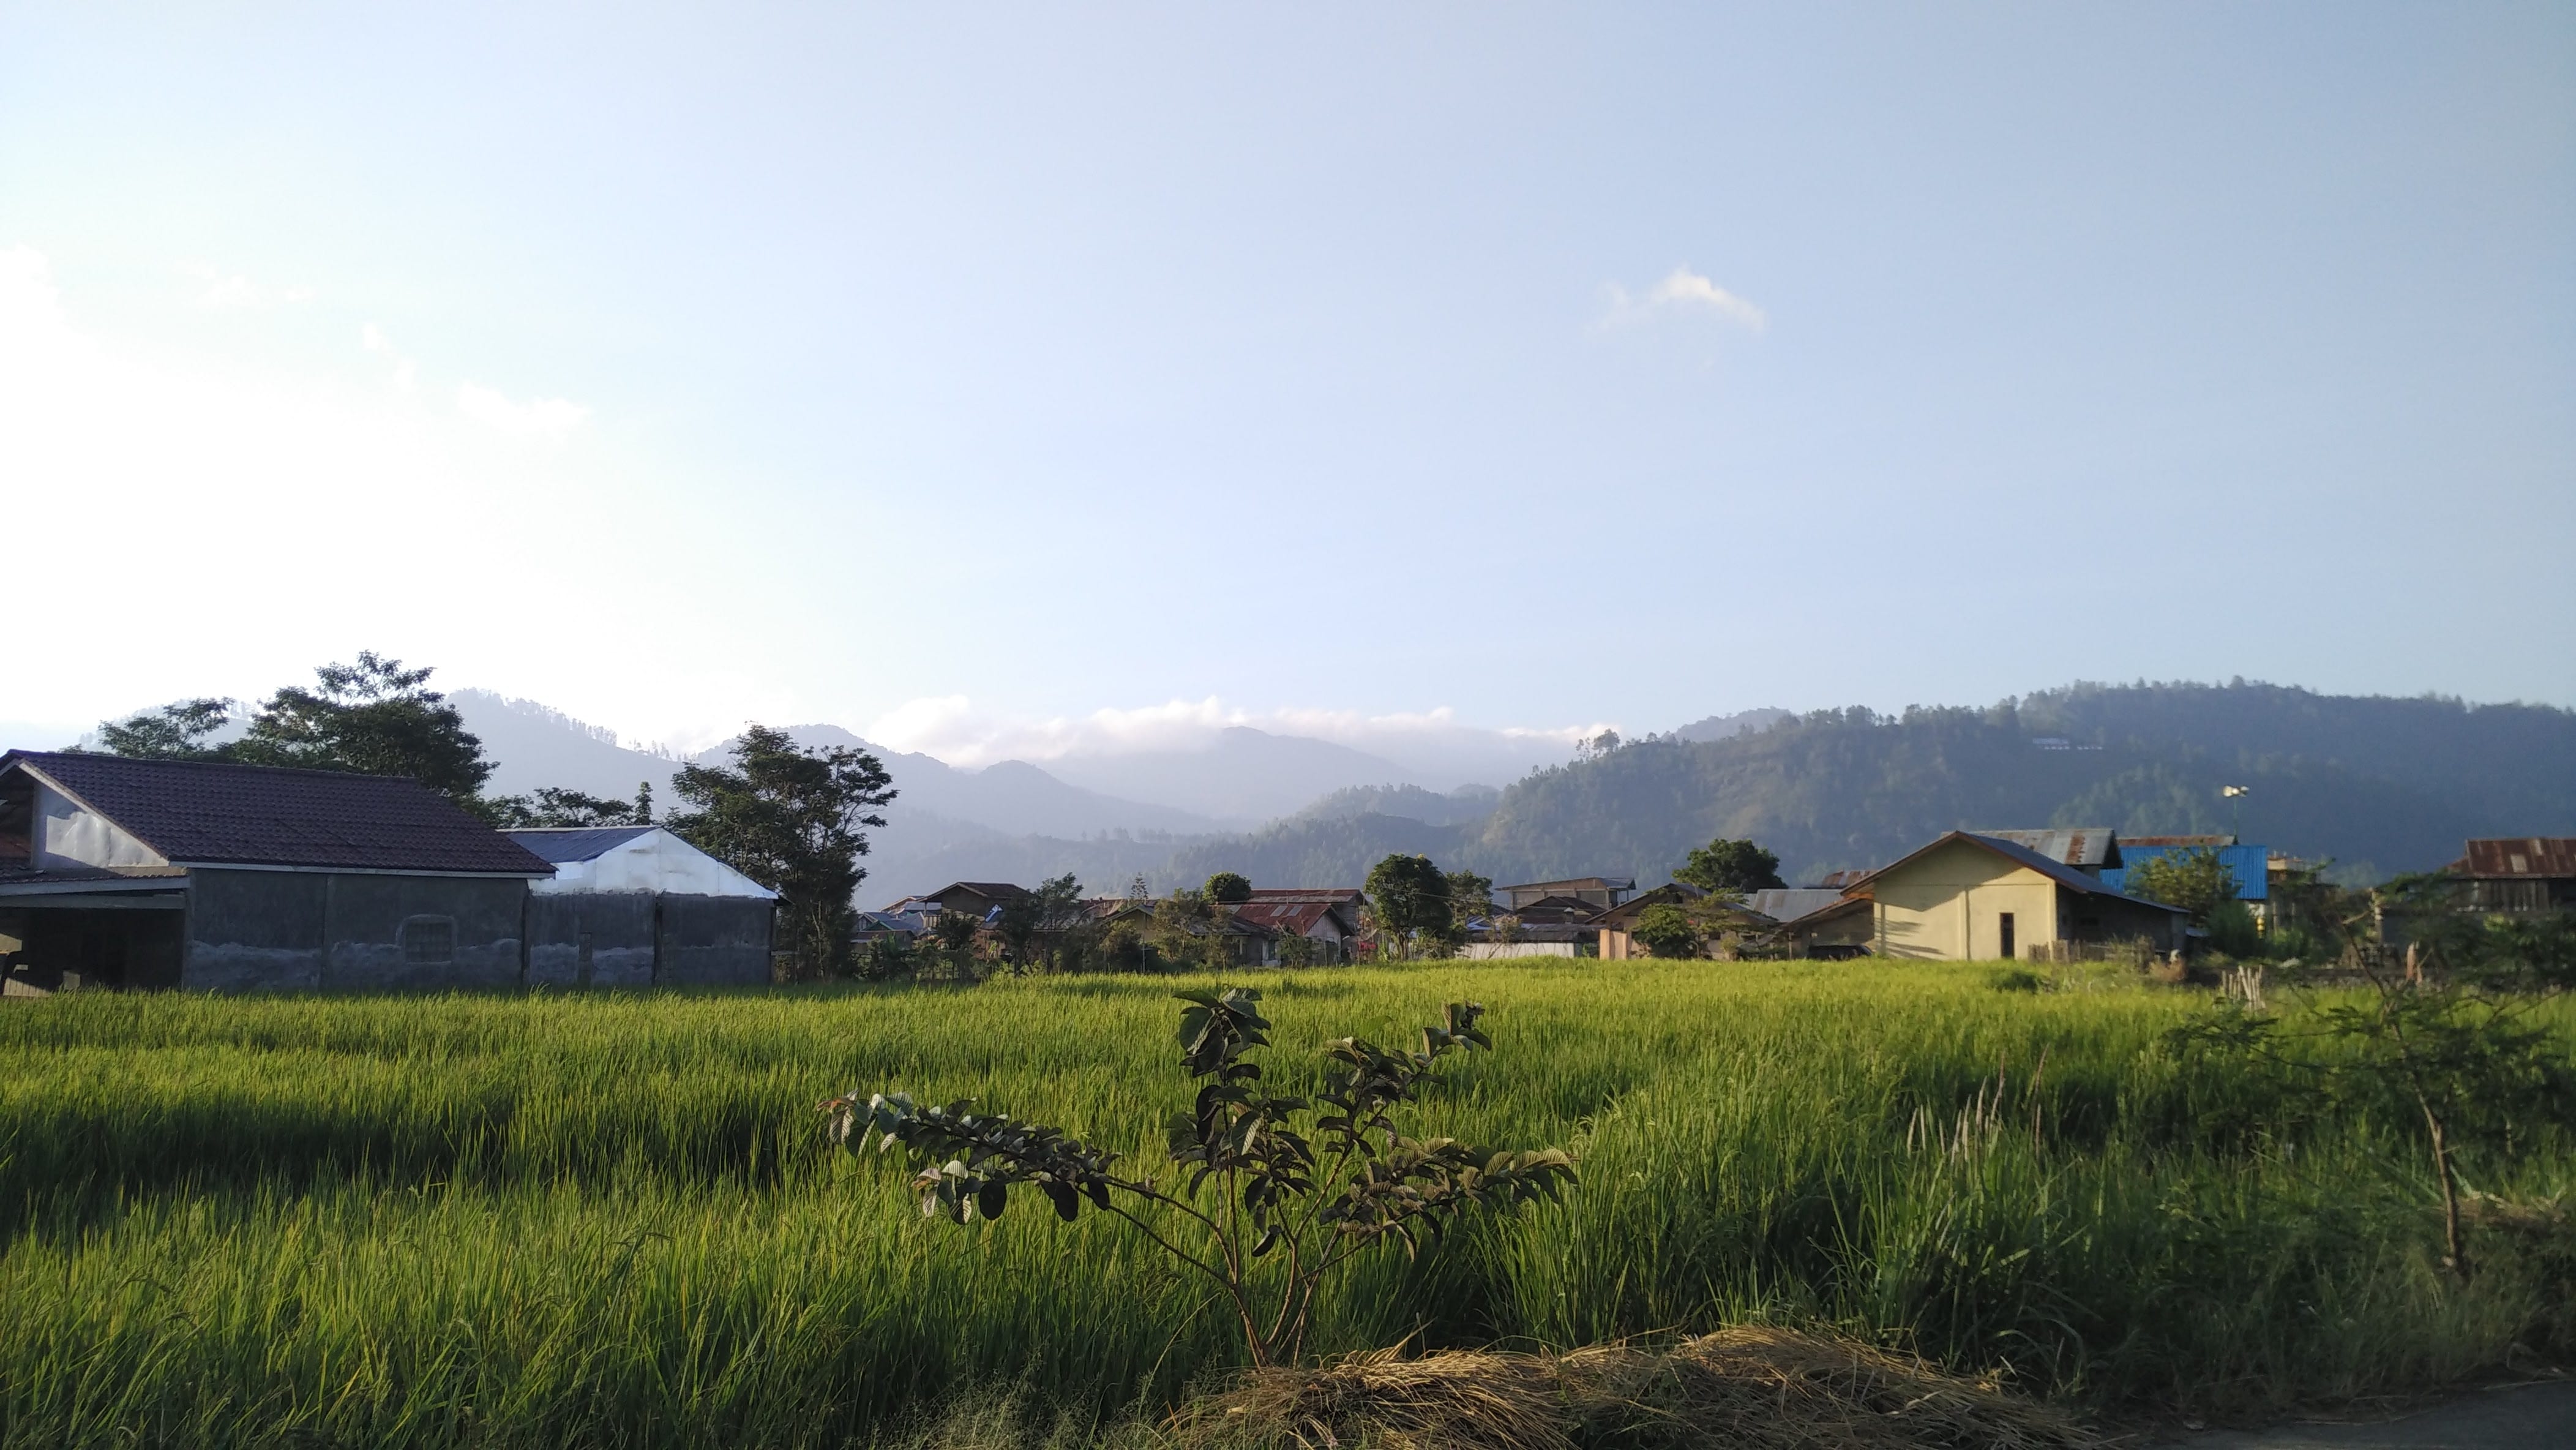 backyard rice field with open space and mountains in the background